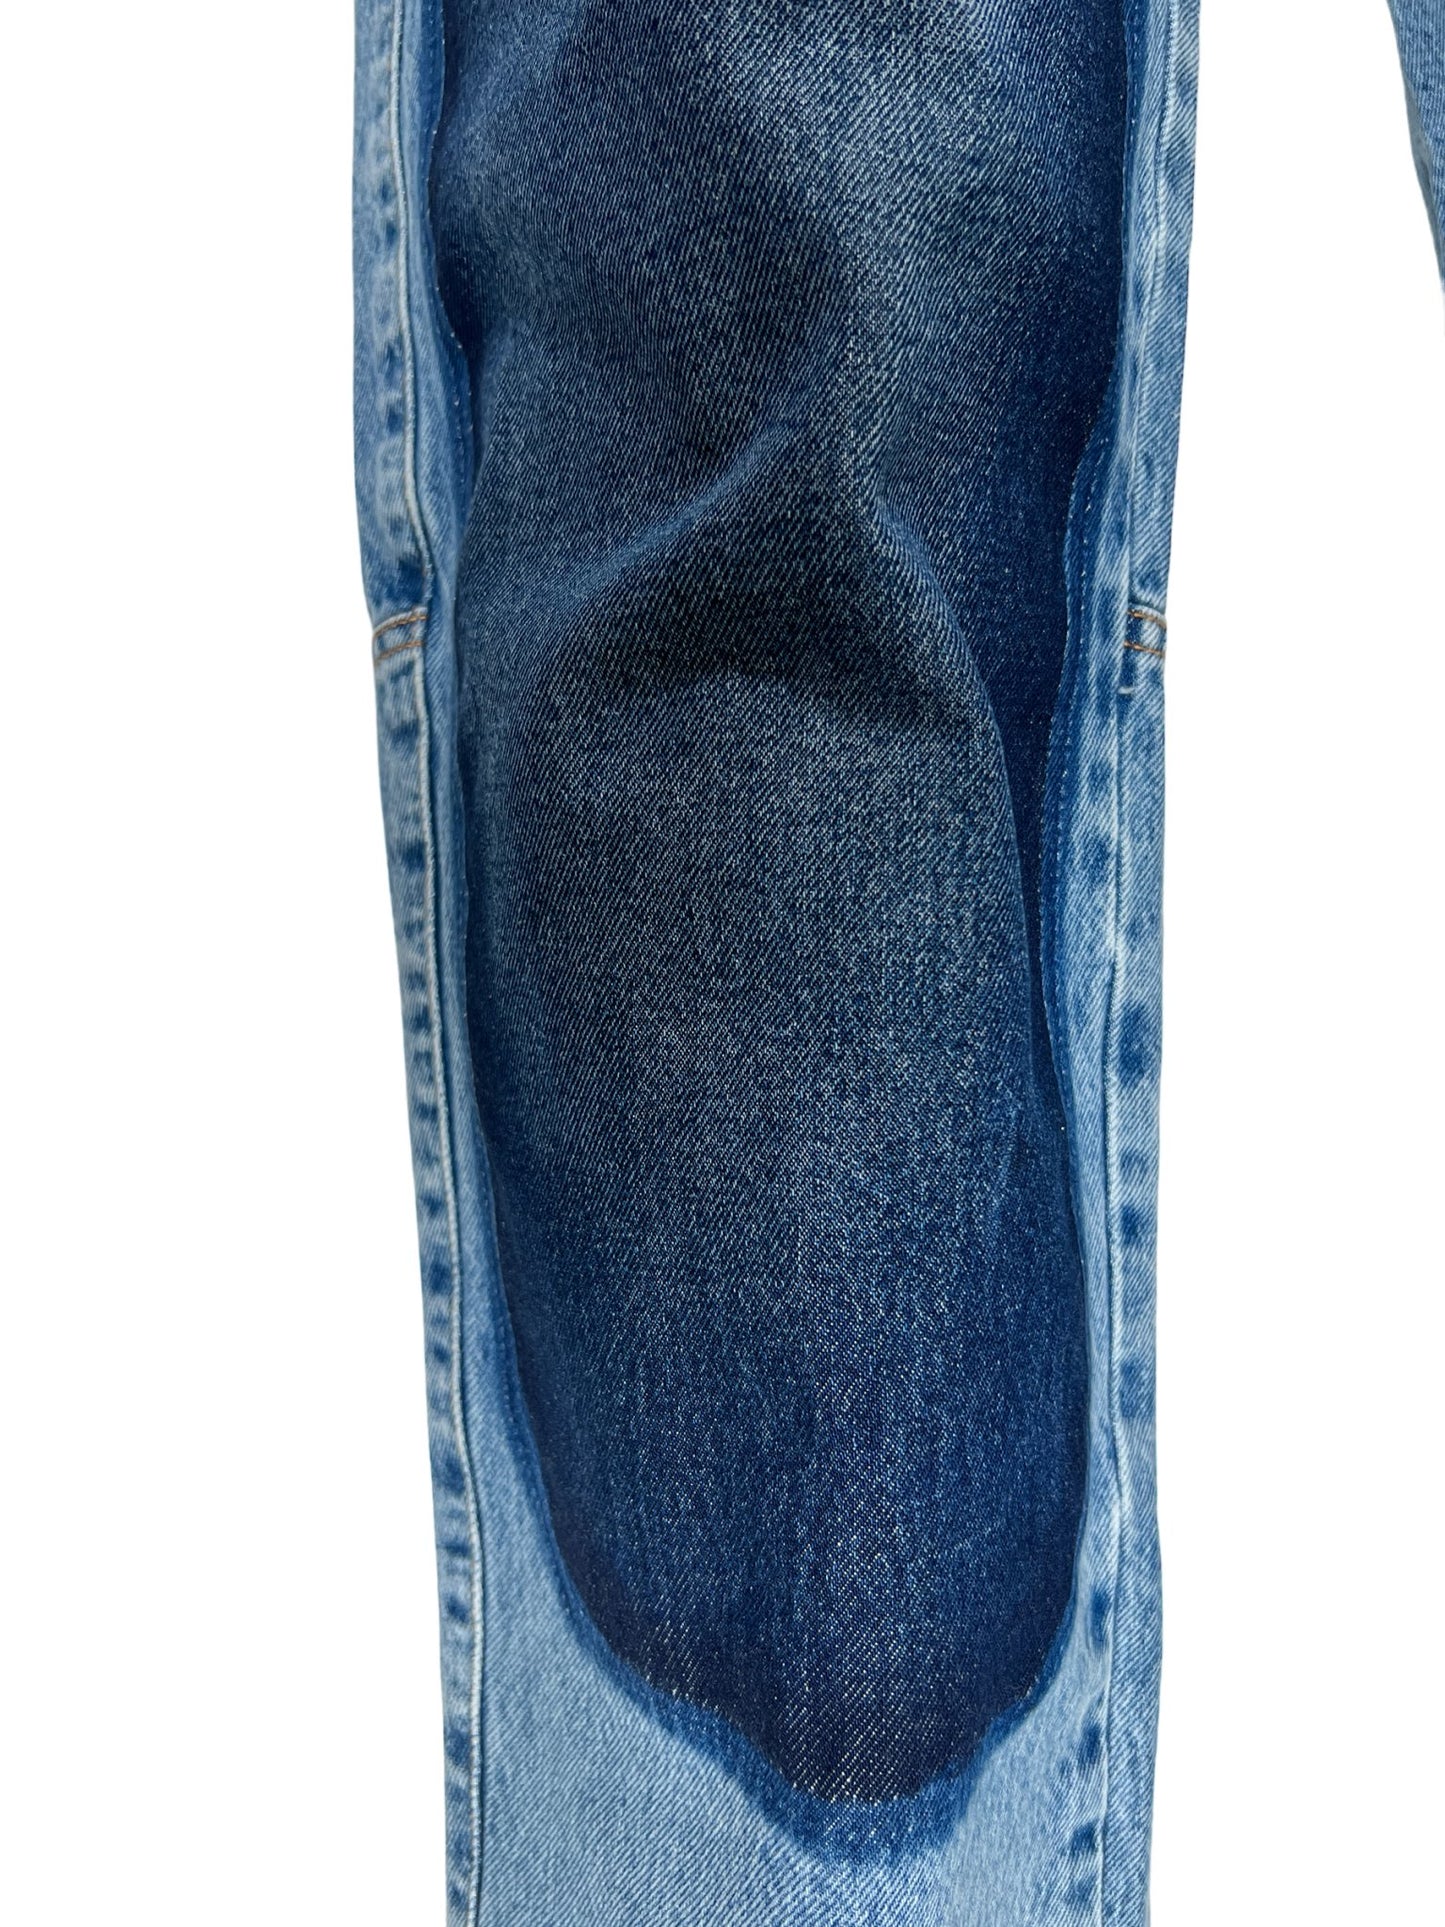 Close-up of a section of DIESEL D-P-5-D-S JEANS GHAW denim fabric with a visible seam.